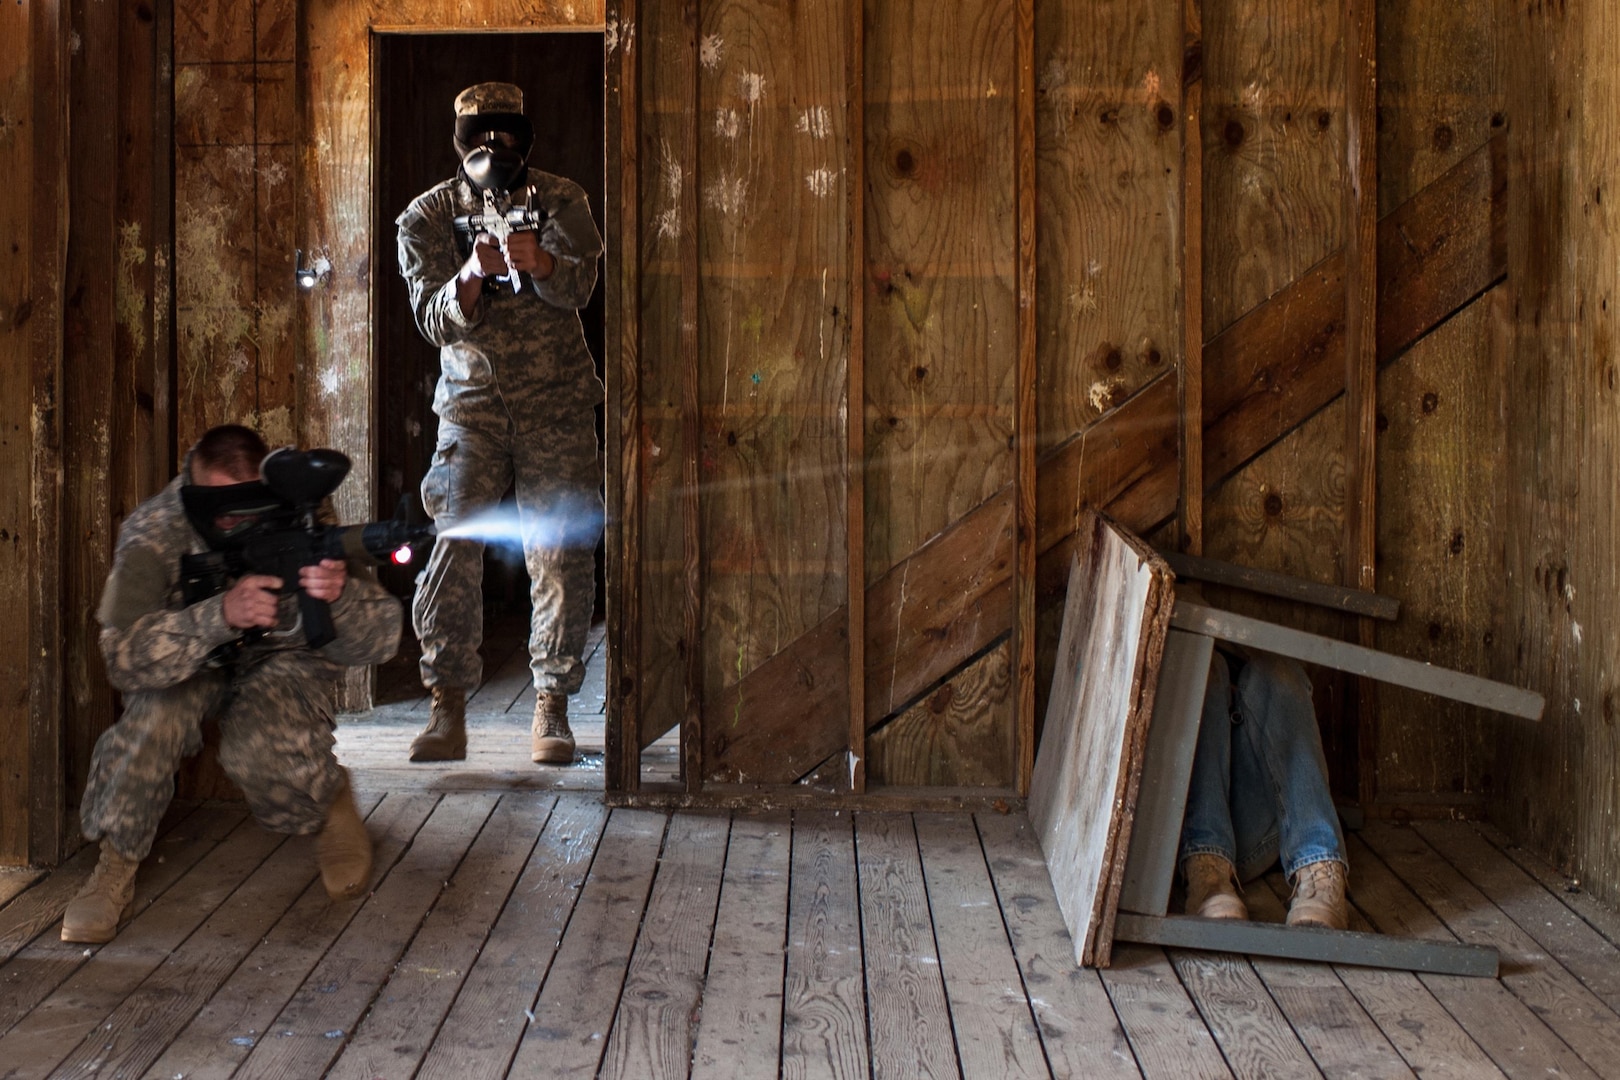 Soldier with U.S. Army Reserve 312th Engineer Company fires M4 rifle paintball gun while opposing force member hides during urban operations training and building clearing procedures, April 18, 2015, at Camp Ripley, Minnesota (U.S. Army/Timothy L. Hale)